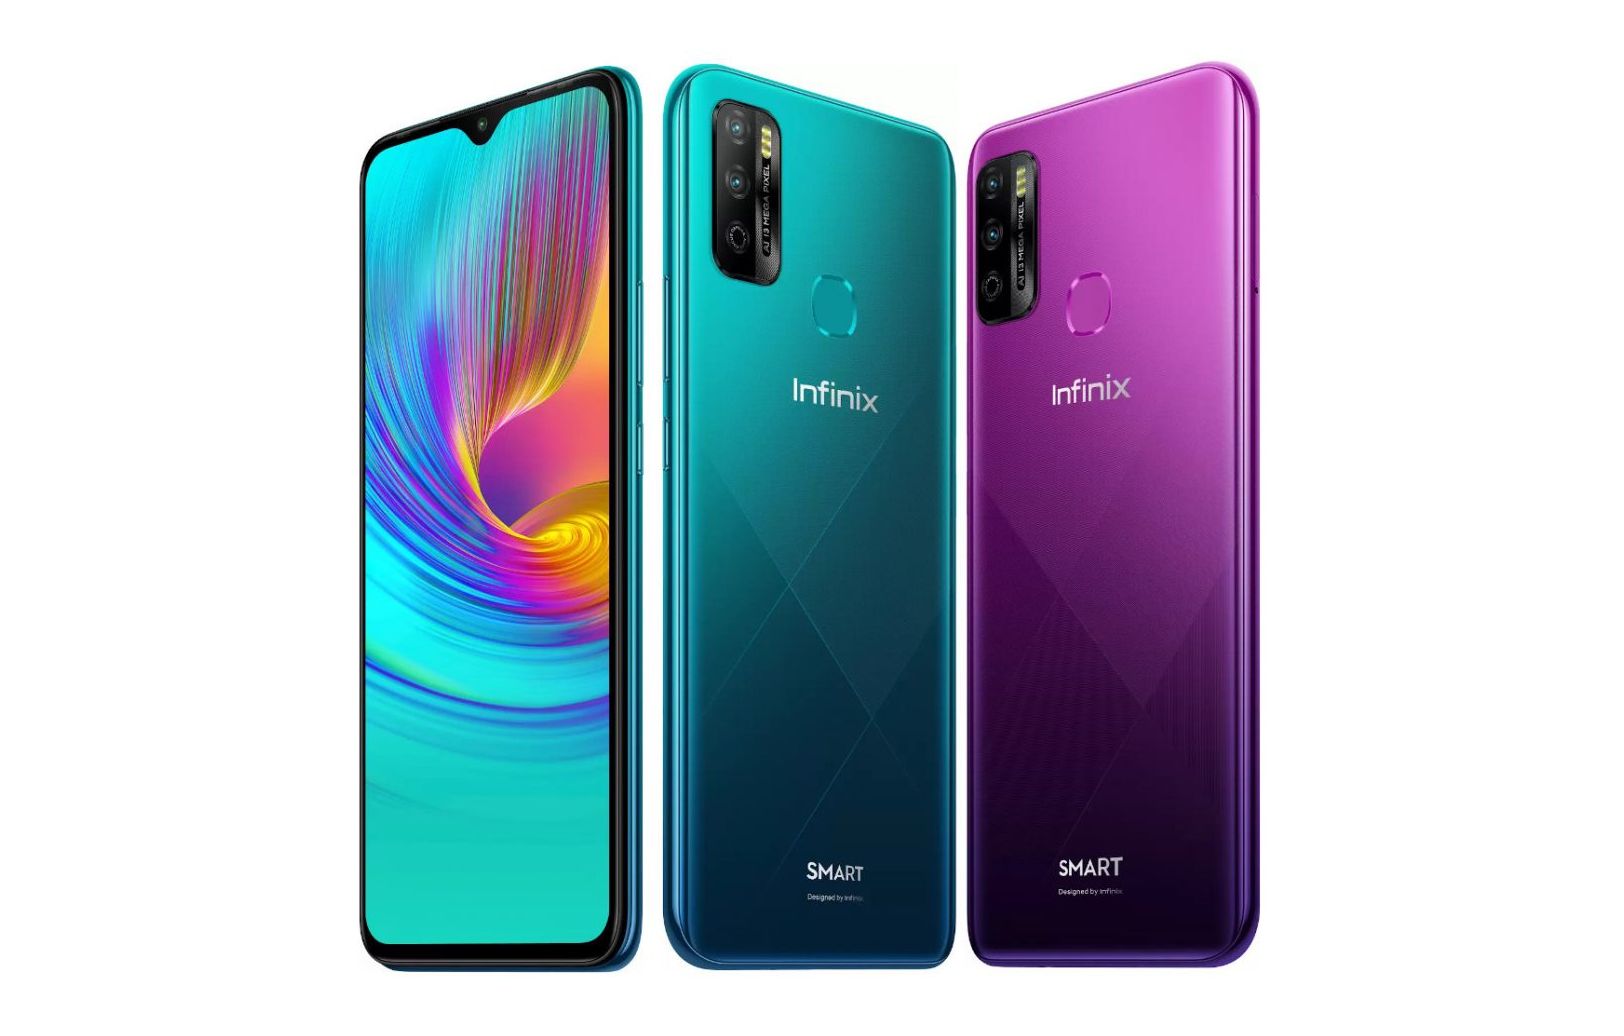 Infinix Smart 4 Plus with 6.82-inch display, 6,000mAh battery, Helio A25  and Rs. 7,999 (~$107) pricing launched in India - Gizmochina